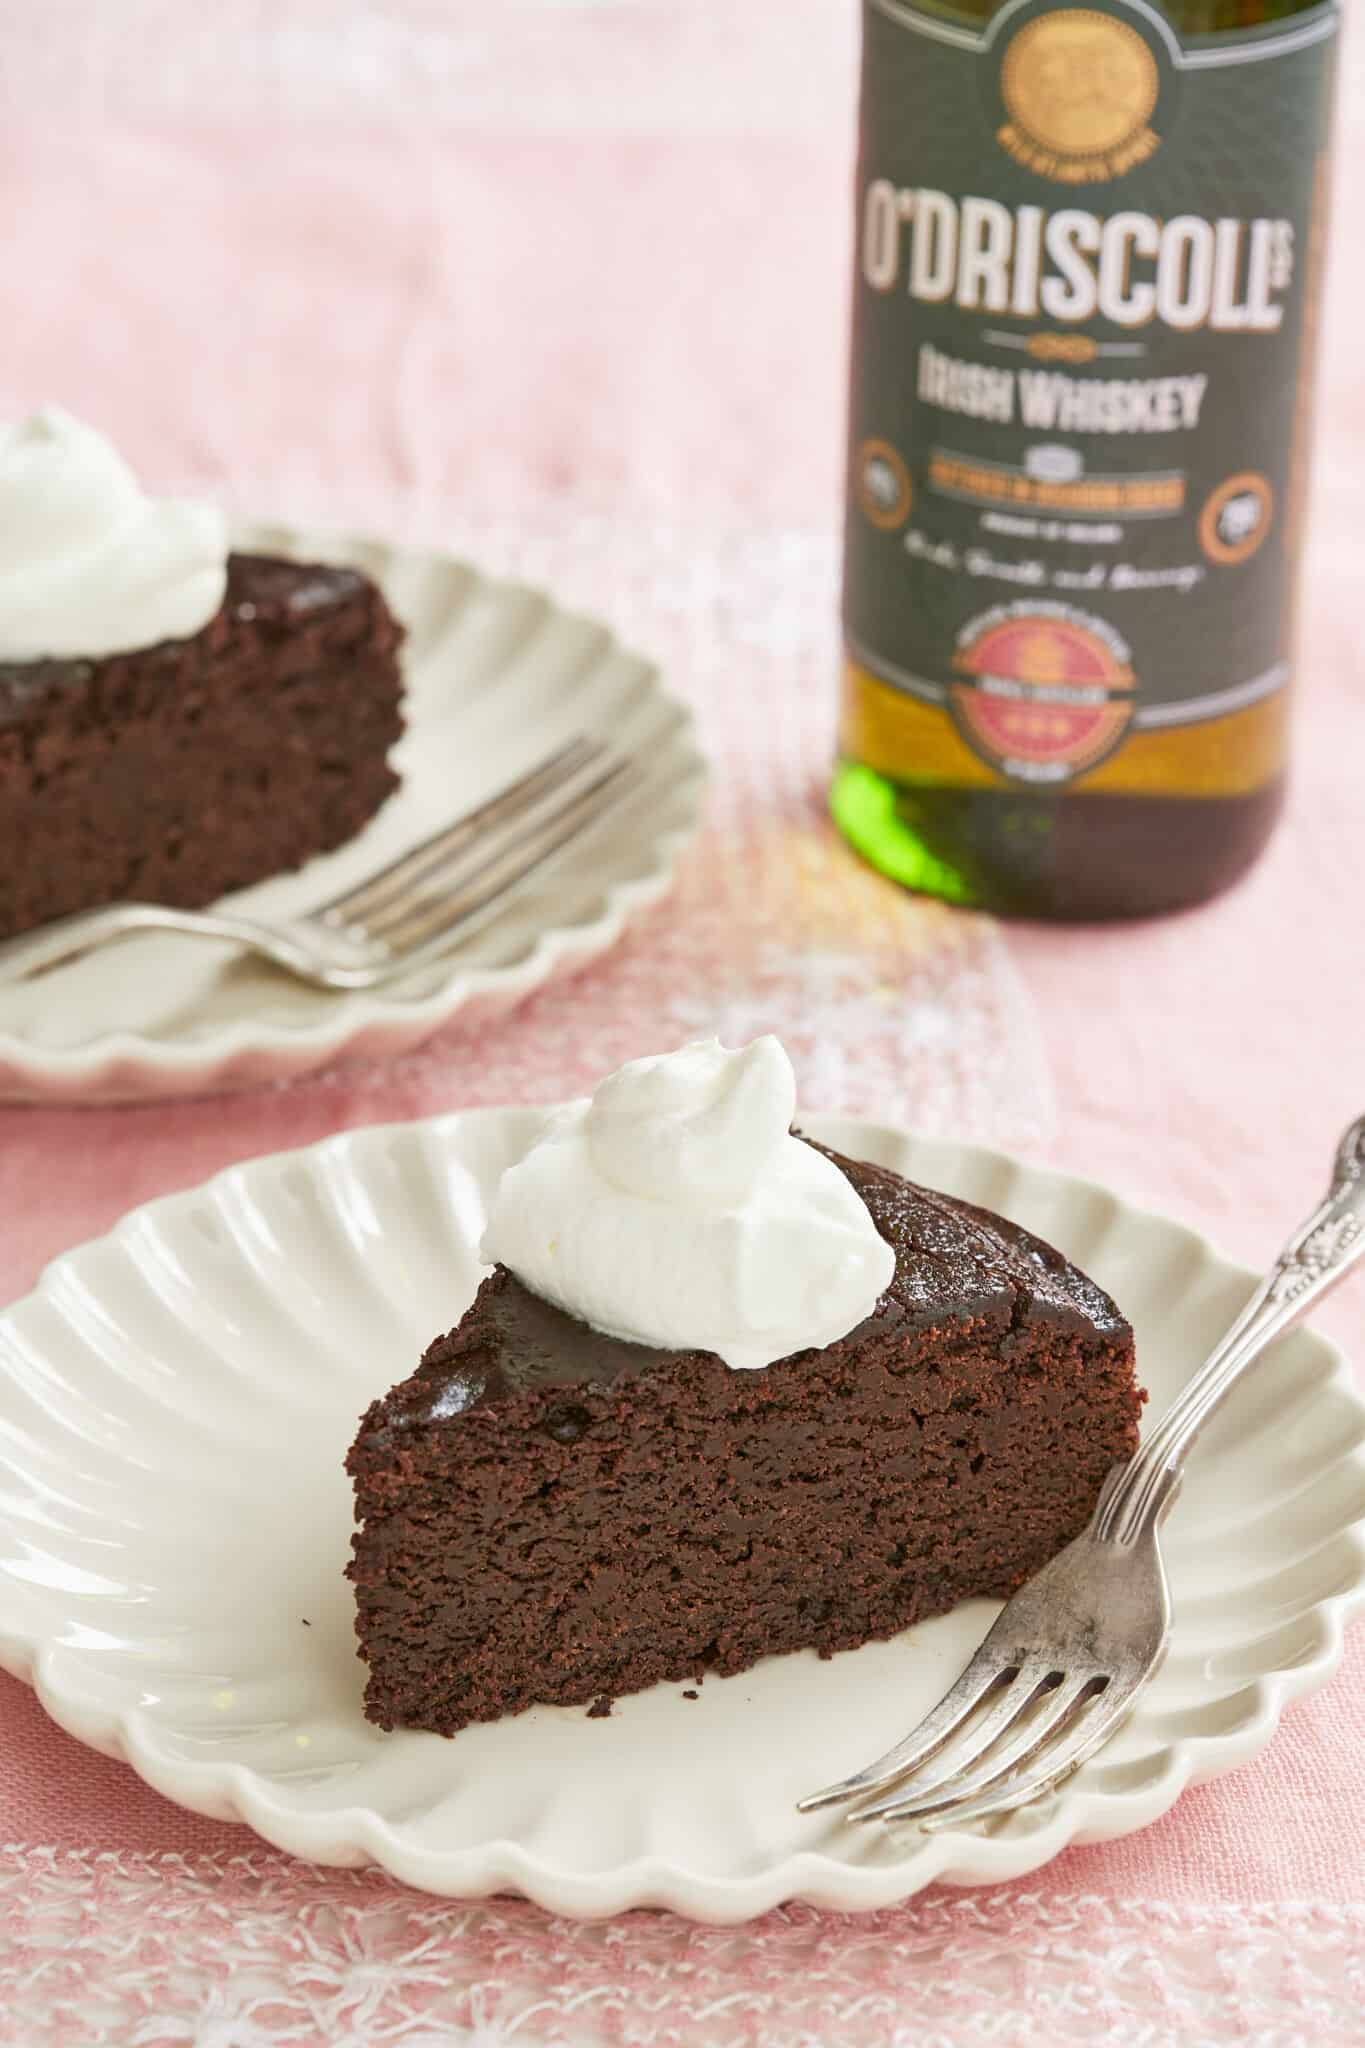 Rich, moist and decadent Irish whiskey Chocolate Cake are sliced and served with whipped cream. A bottle of O'Driscolls Irish Whiskey is served on the side.